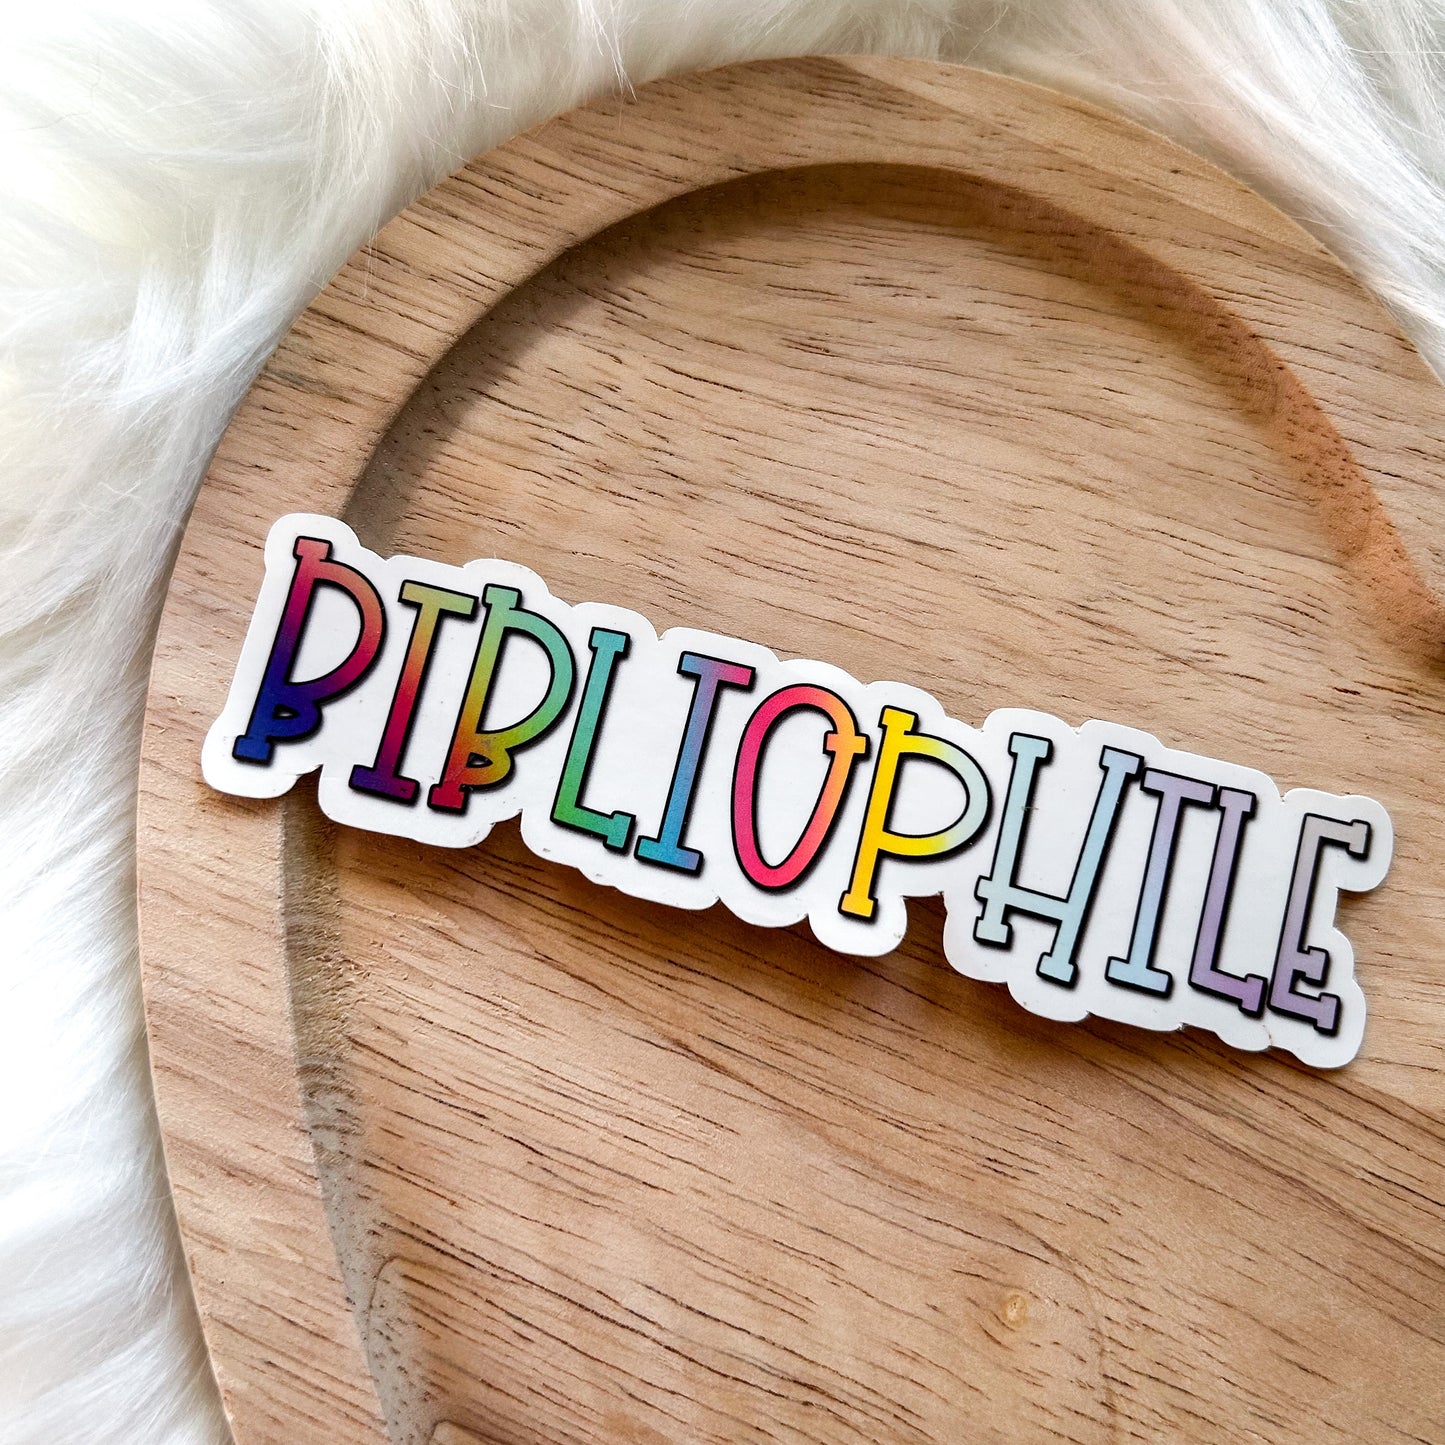 A sticker with the word Bibliophile on it.